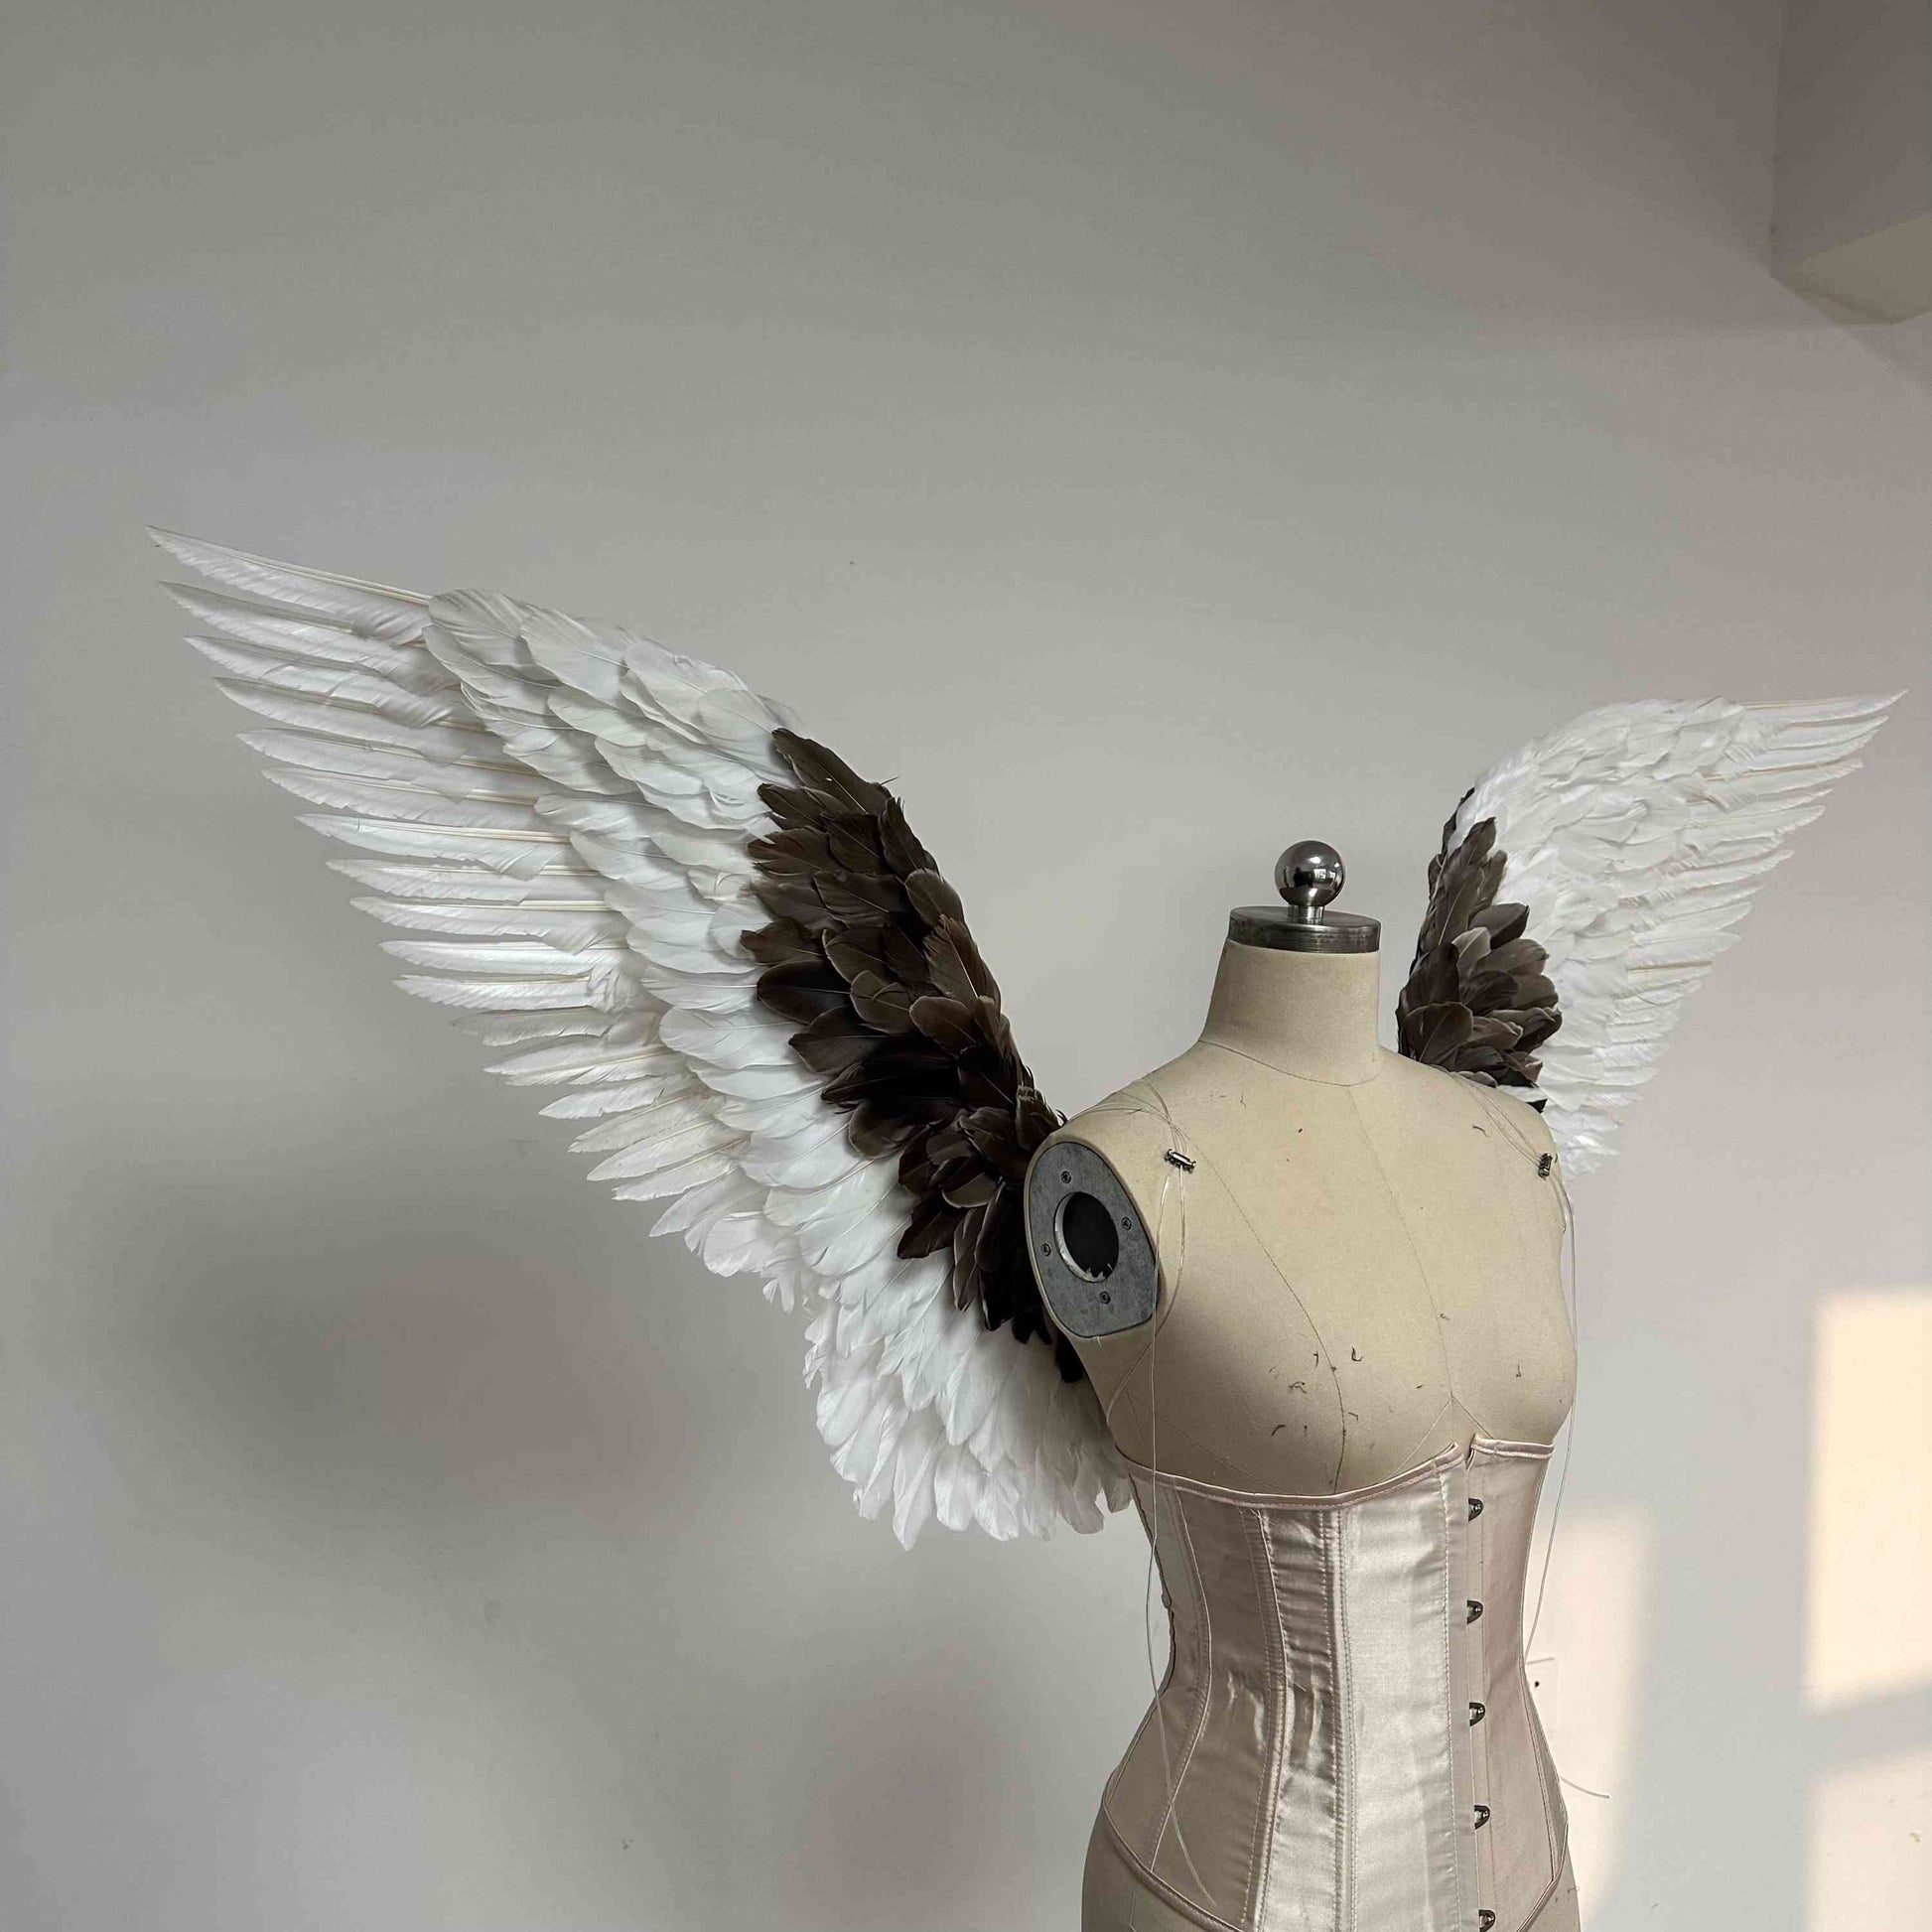 Our white gray angel wings from the right side. Made from goose feathers. Wings for angel wings costume. Suitable for photoshoots.